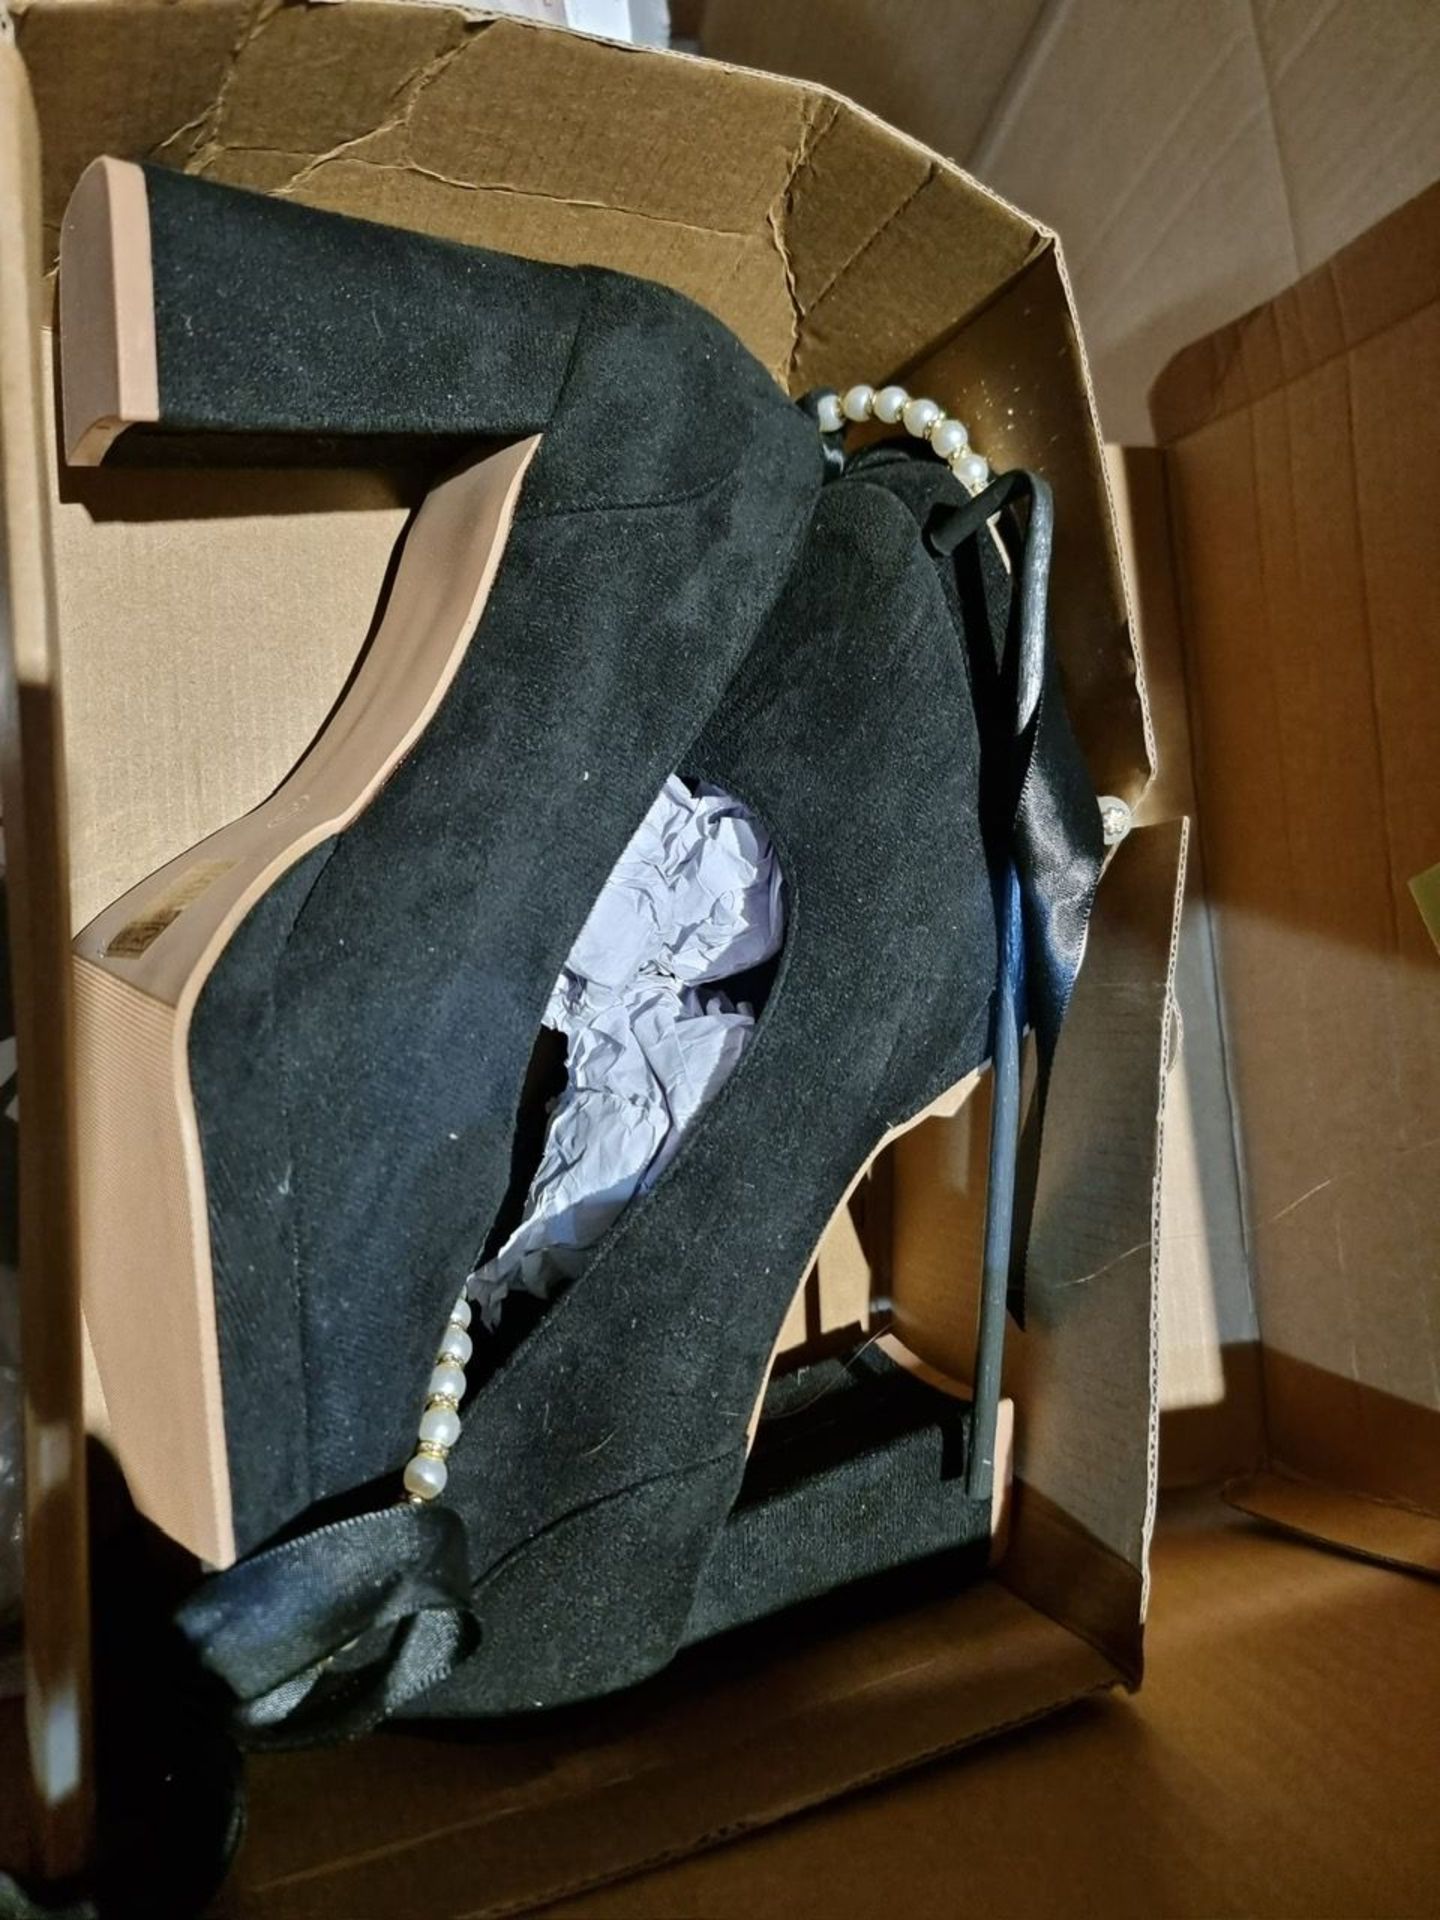 TRADE LOT 50 x BAGGED/BOXED ITEMS FROM A MAJOR ONLINE RETAILER TO INCLUDE MAINLY CLOTHING & FOOTWEAR - Image 8 of 34